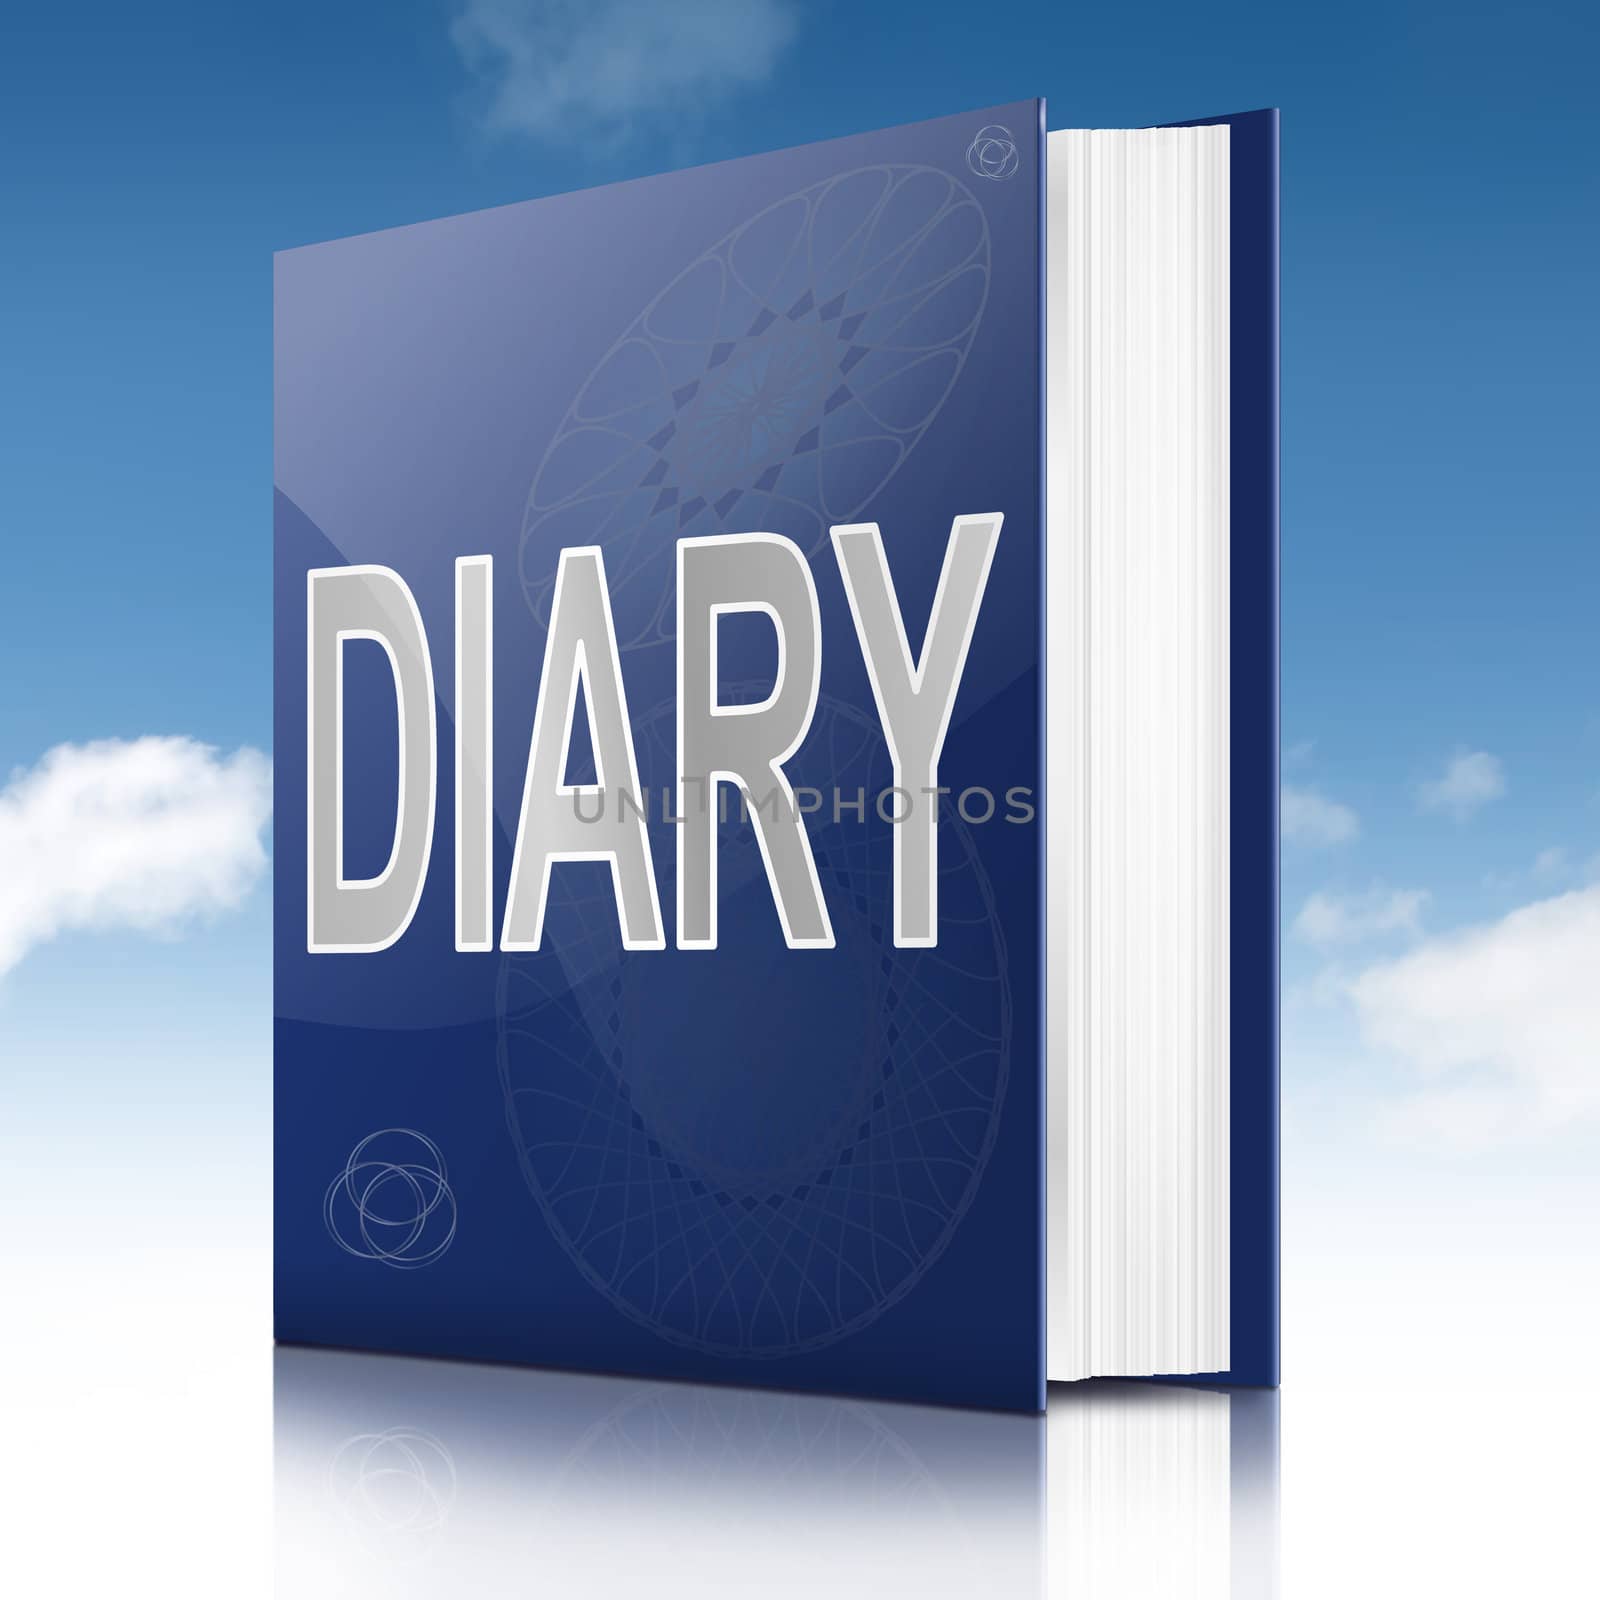 Illustration depicting a book with a diary concept title. Sky background.